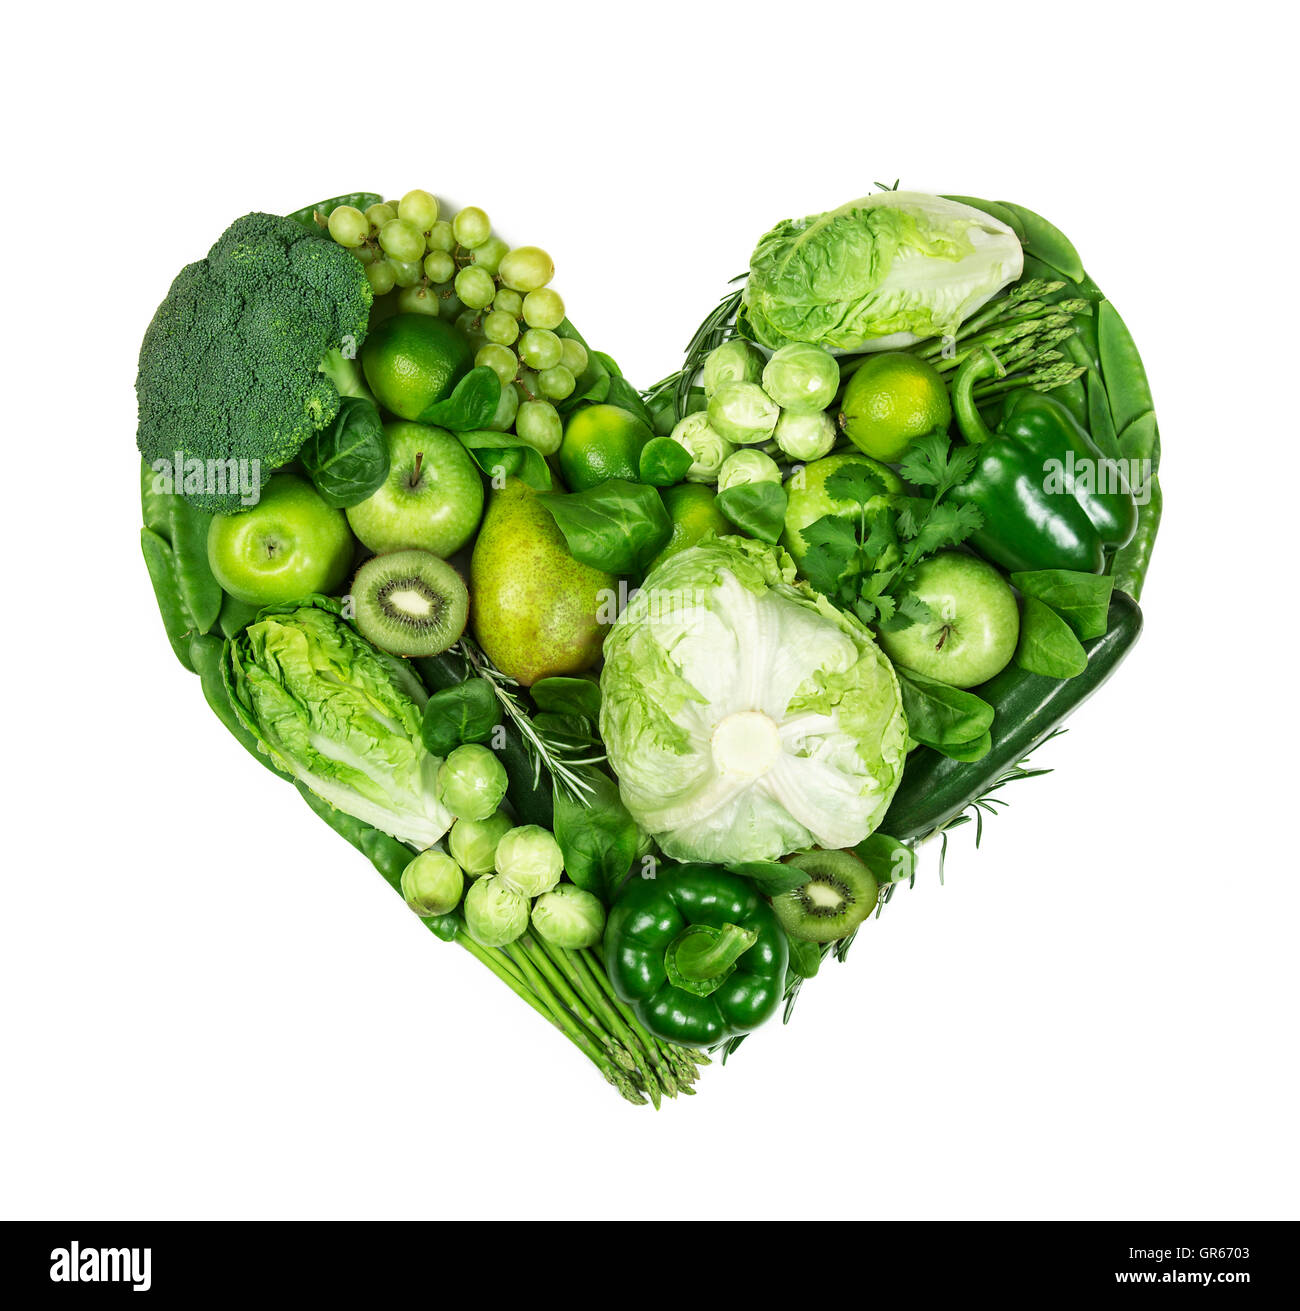 Heart of green fruits and vegetables isolated on a white background Stock Photo